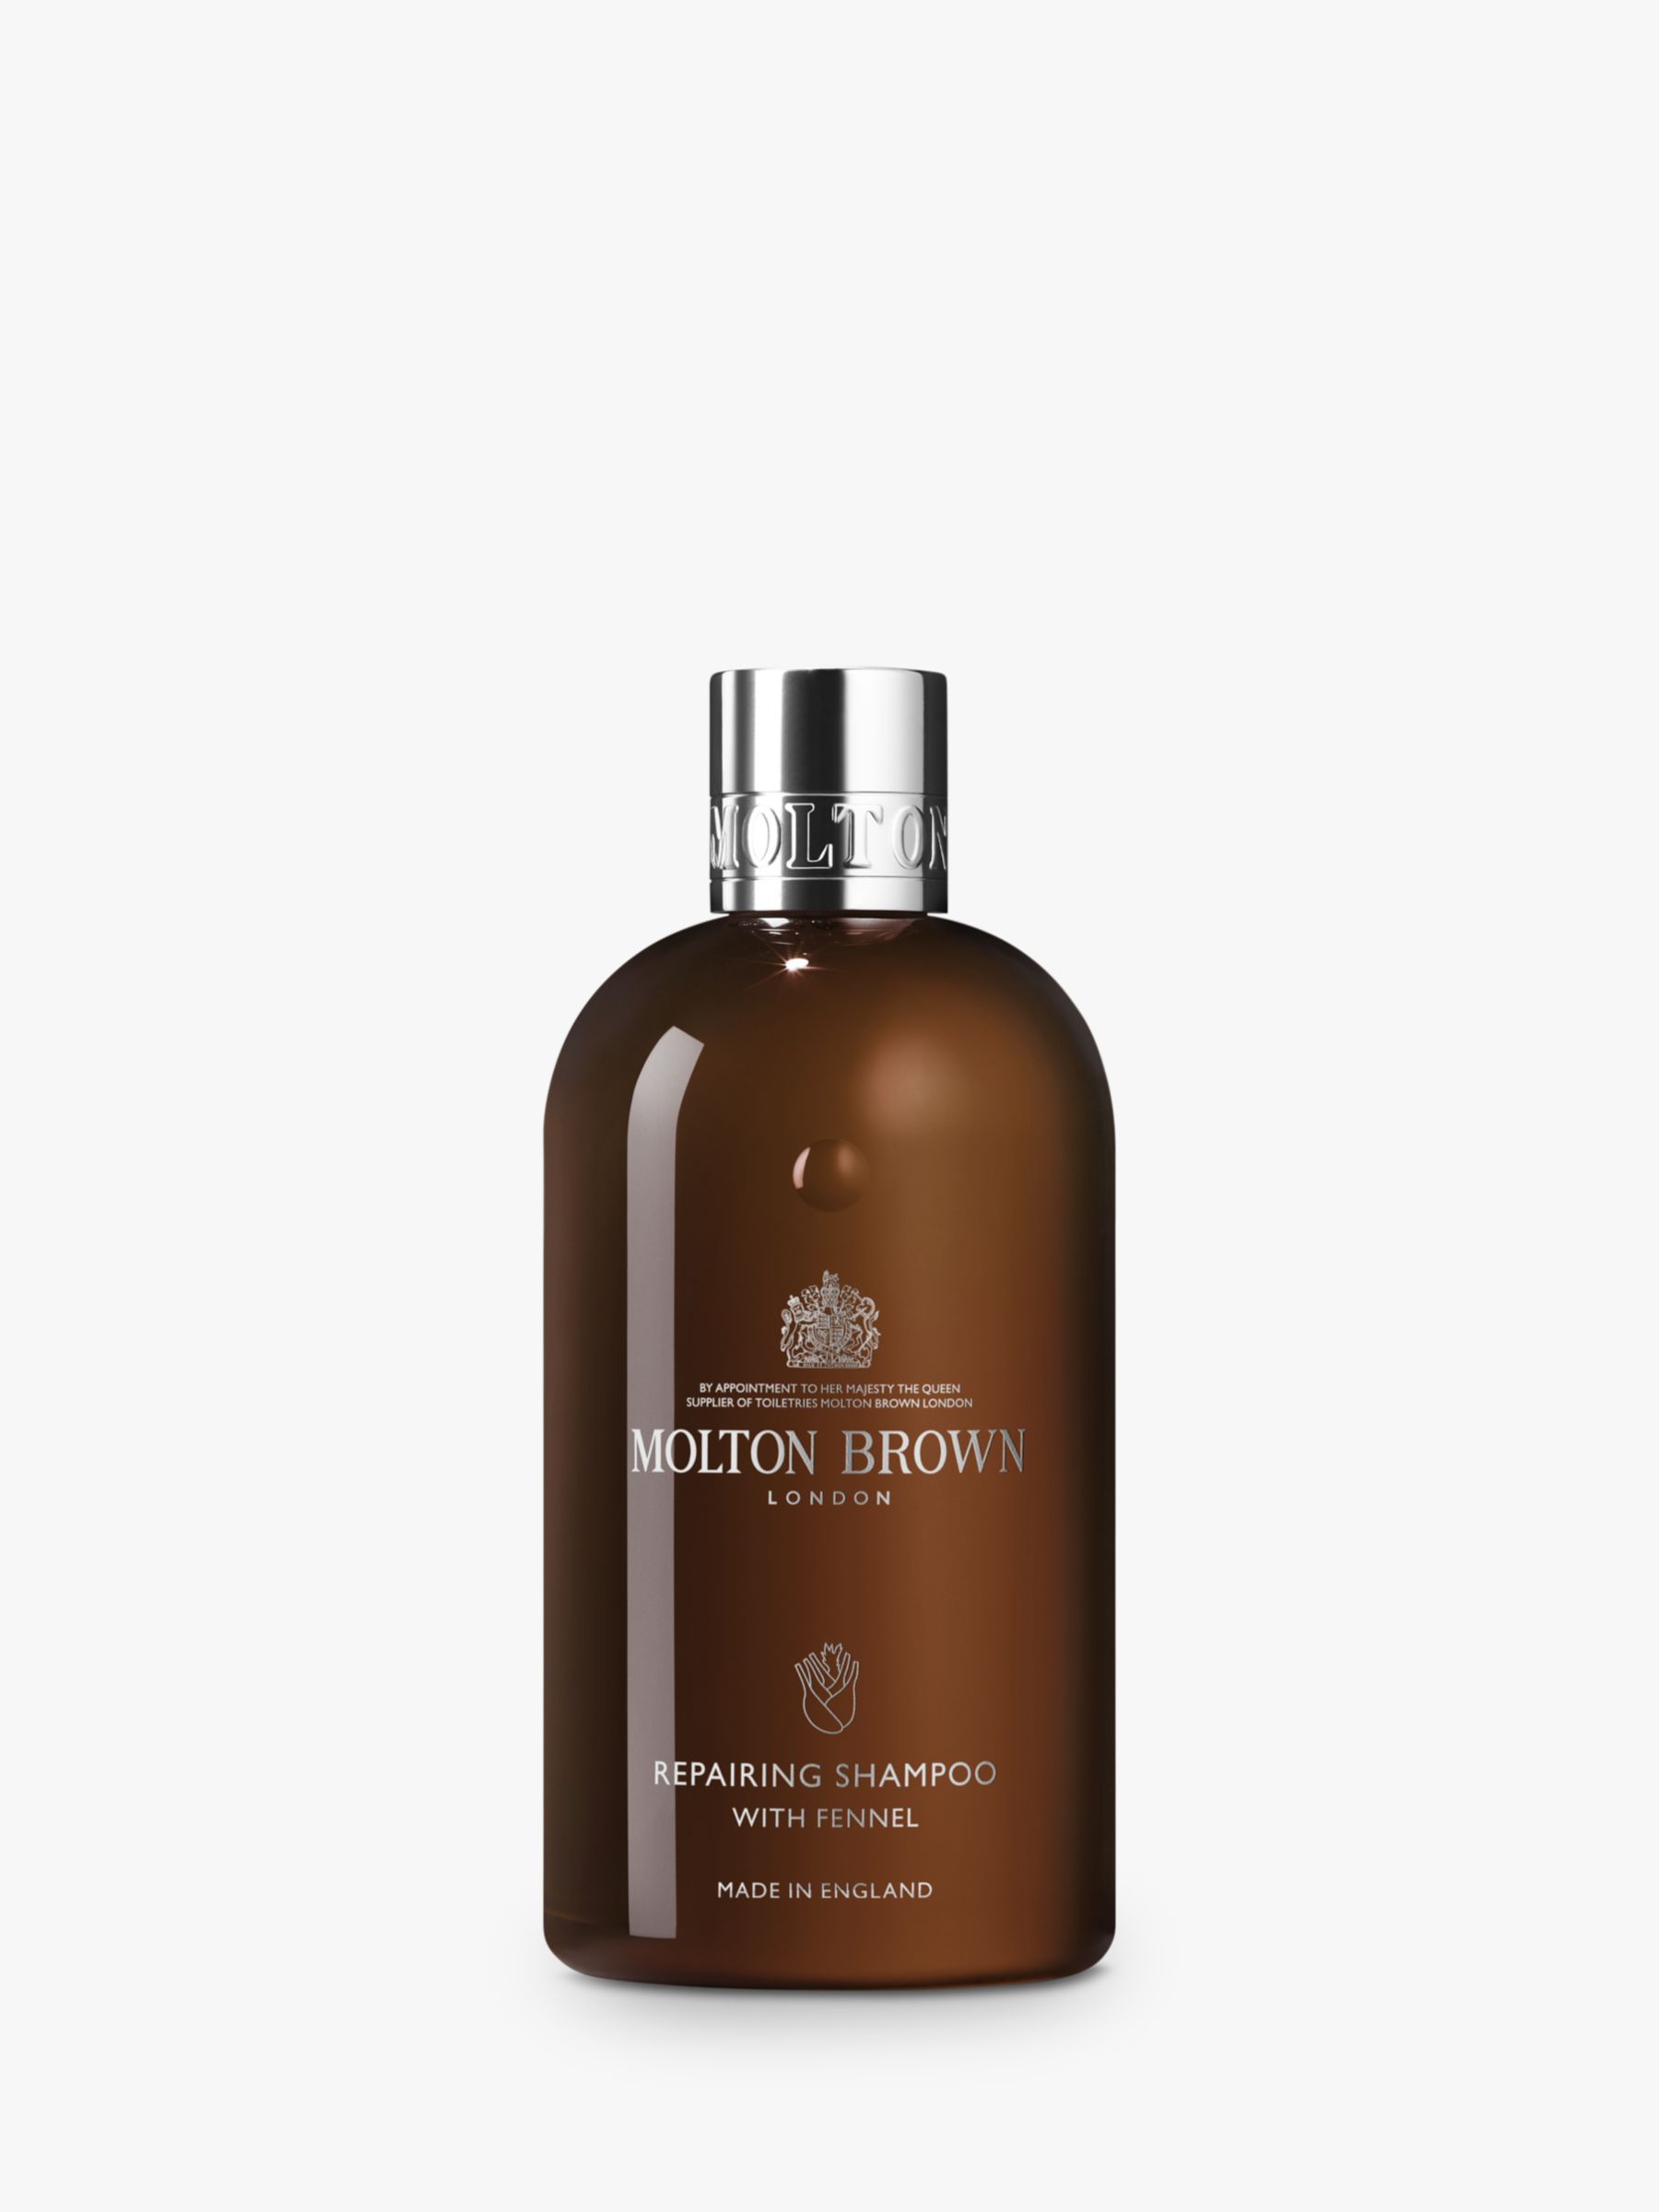 Molton Brown Repairing Shampoo With Fennel, 300ml at John Lewis & Partners